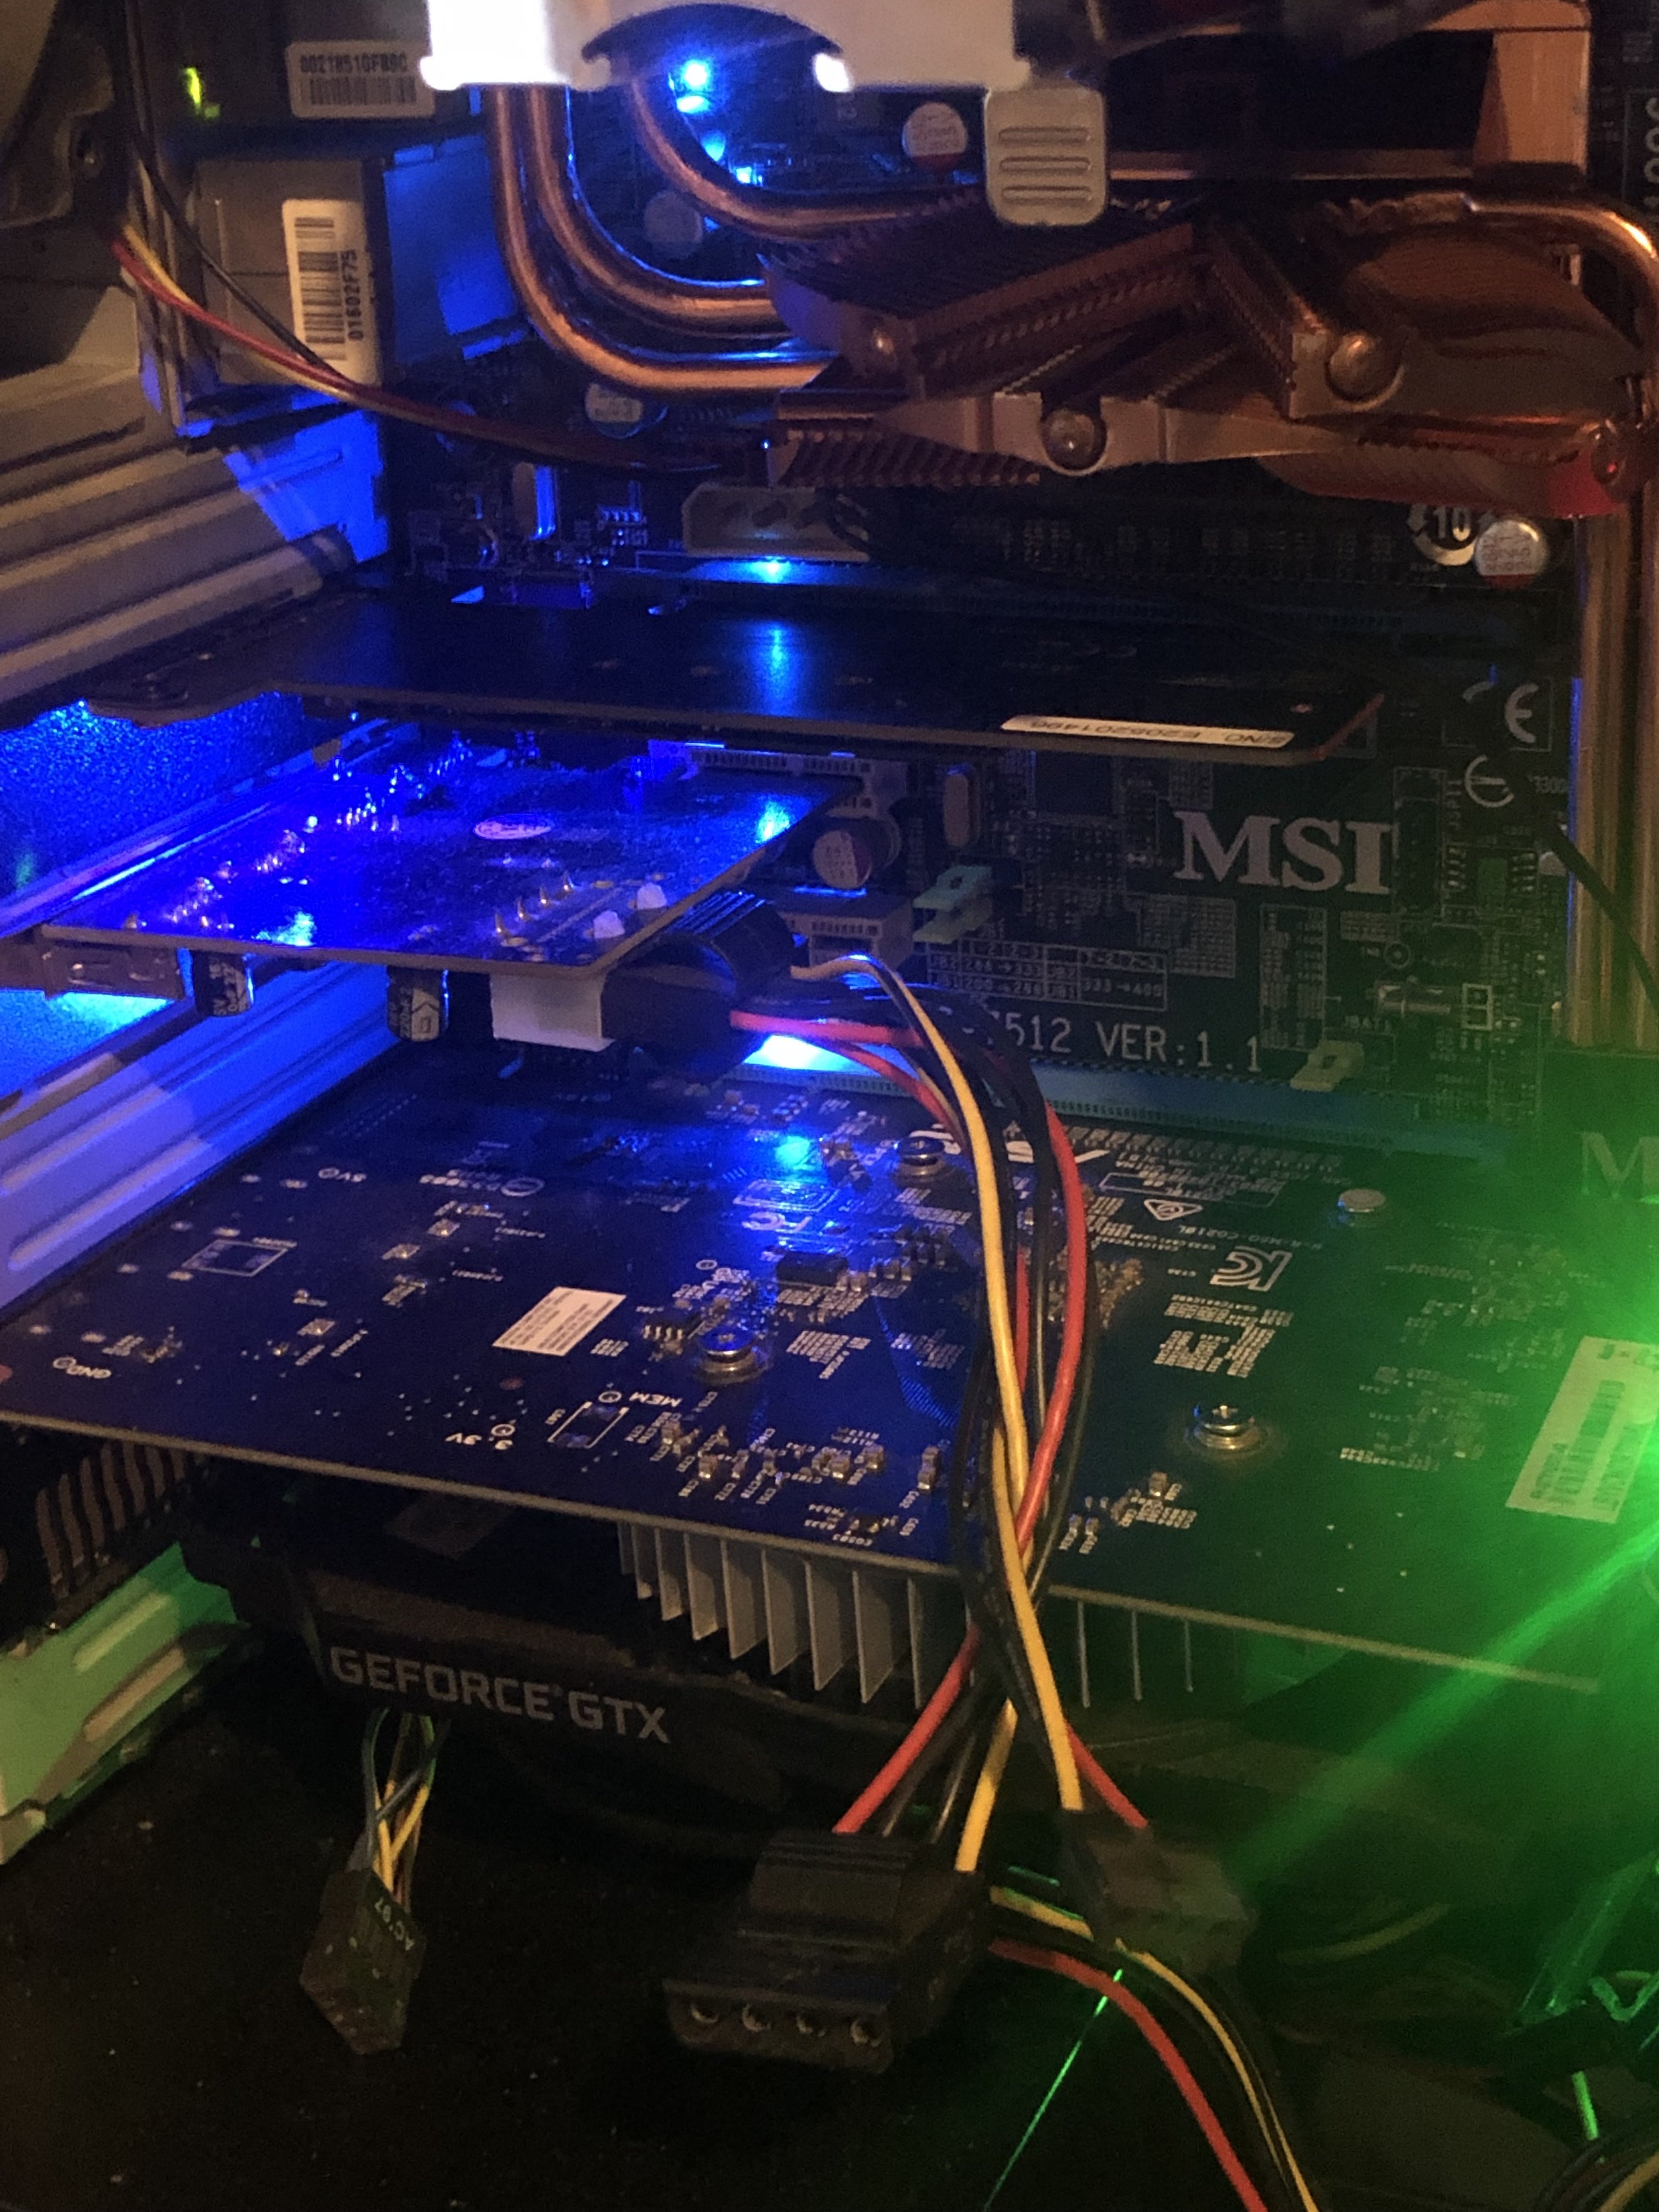 HowTo] Get full NVMe Support for all Systems with an AMI UEFI BIOS - NVMe  Support for old Systems - Win-Raid Forum